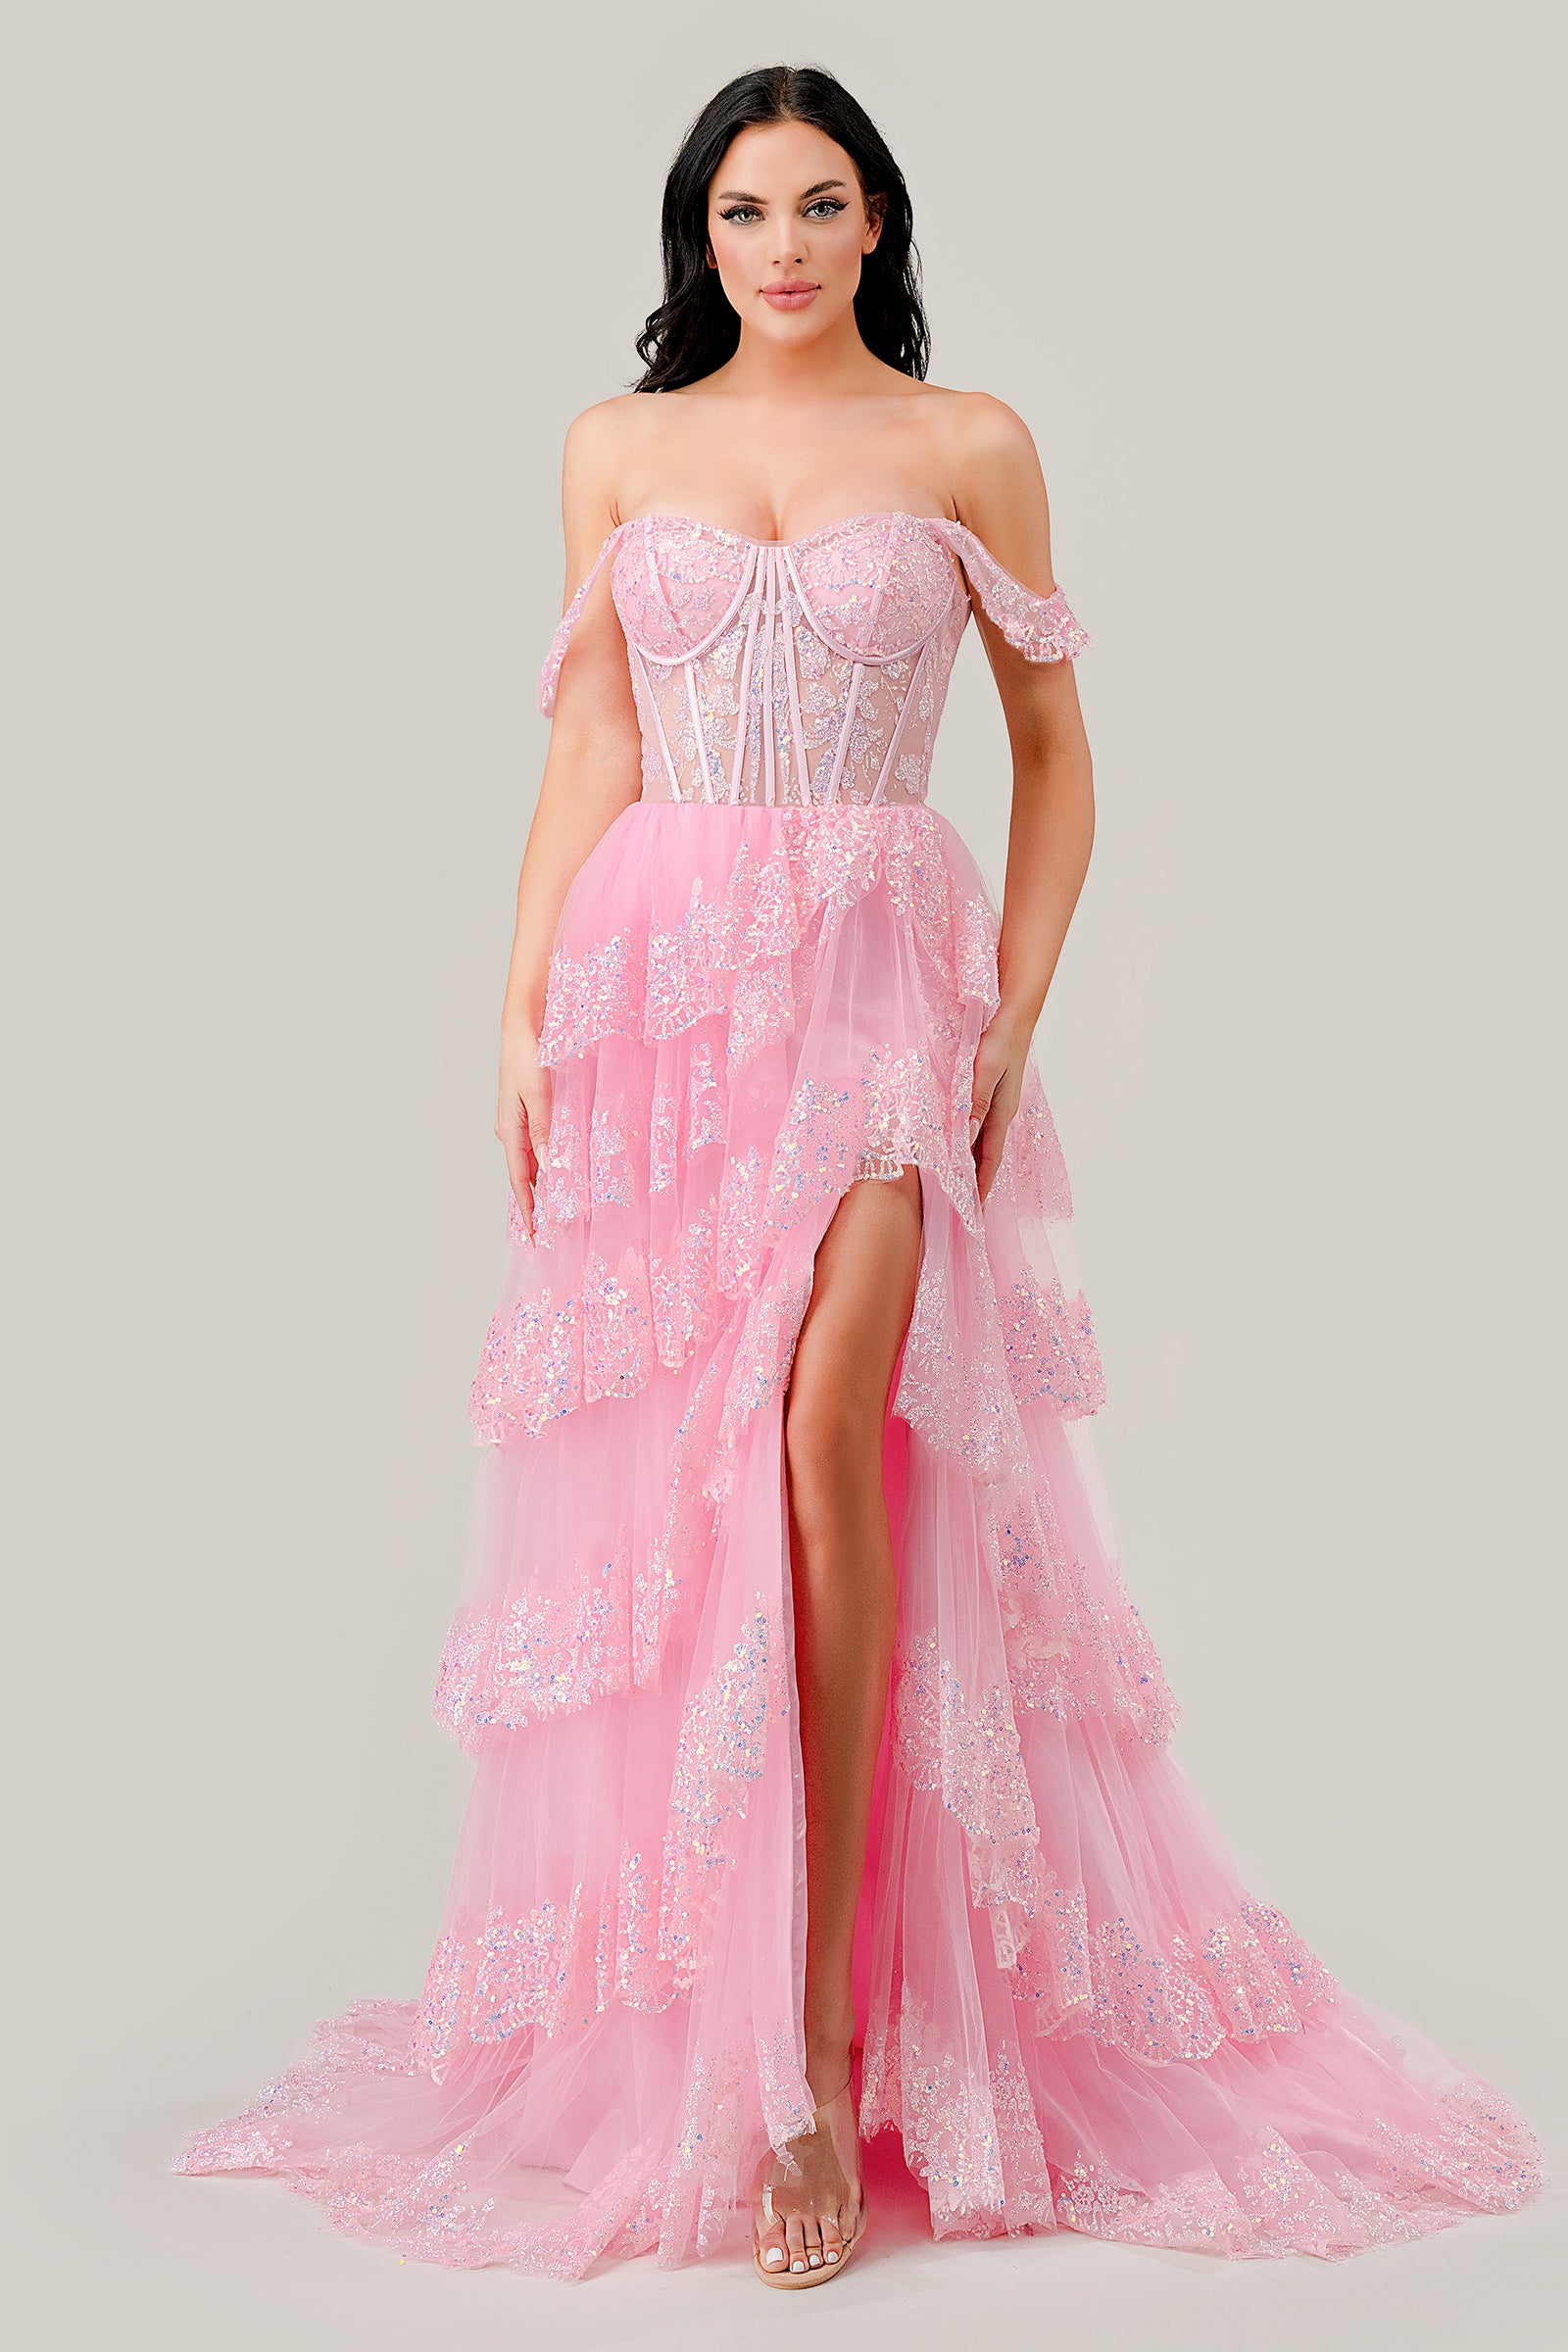 Prom Dresses Long Formal Sequin Evening Prom Gown Pink